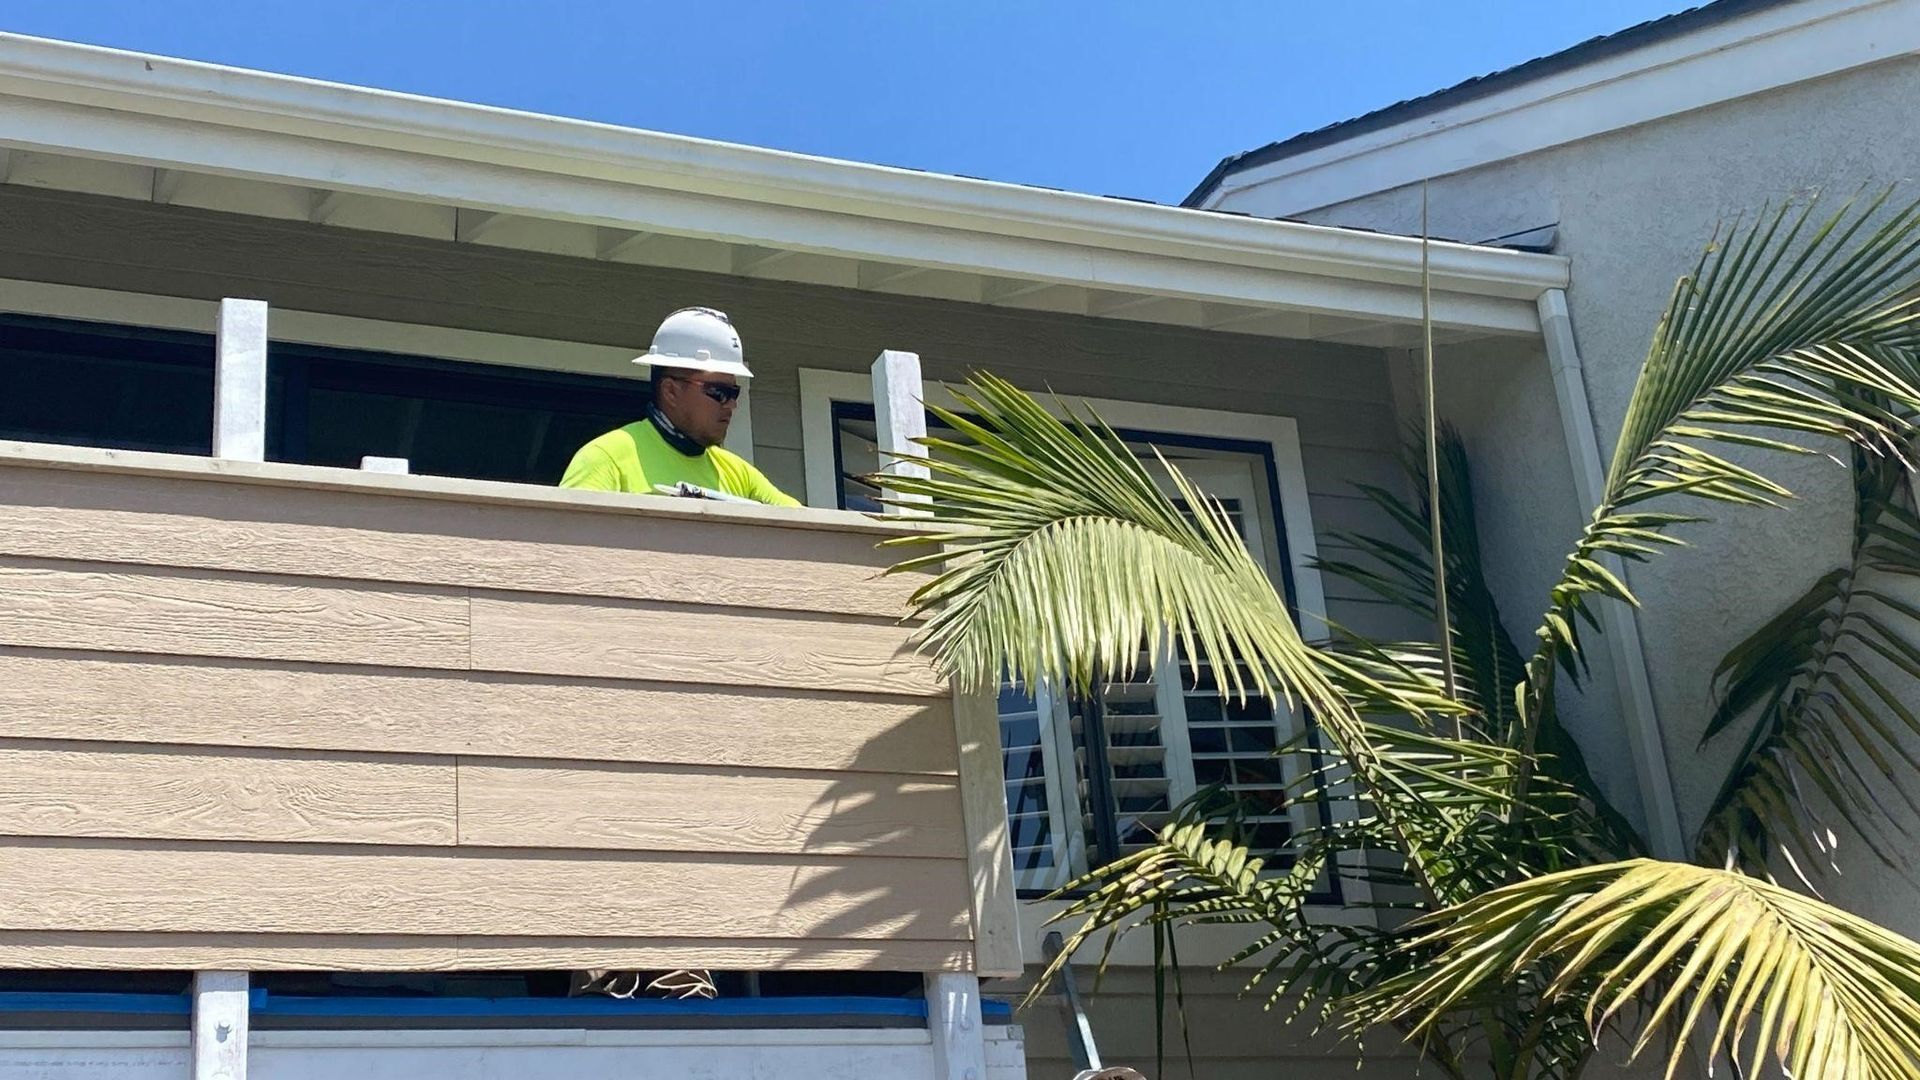 What to Expect from an SB 326 and SB 721 Balcony Inspection?